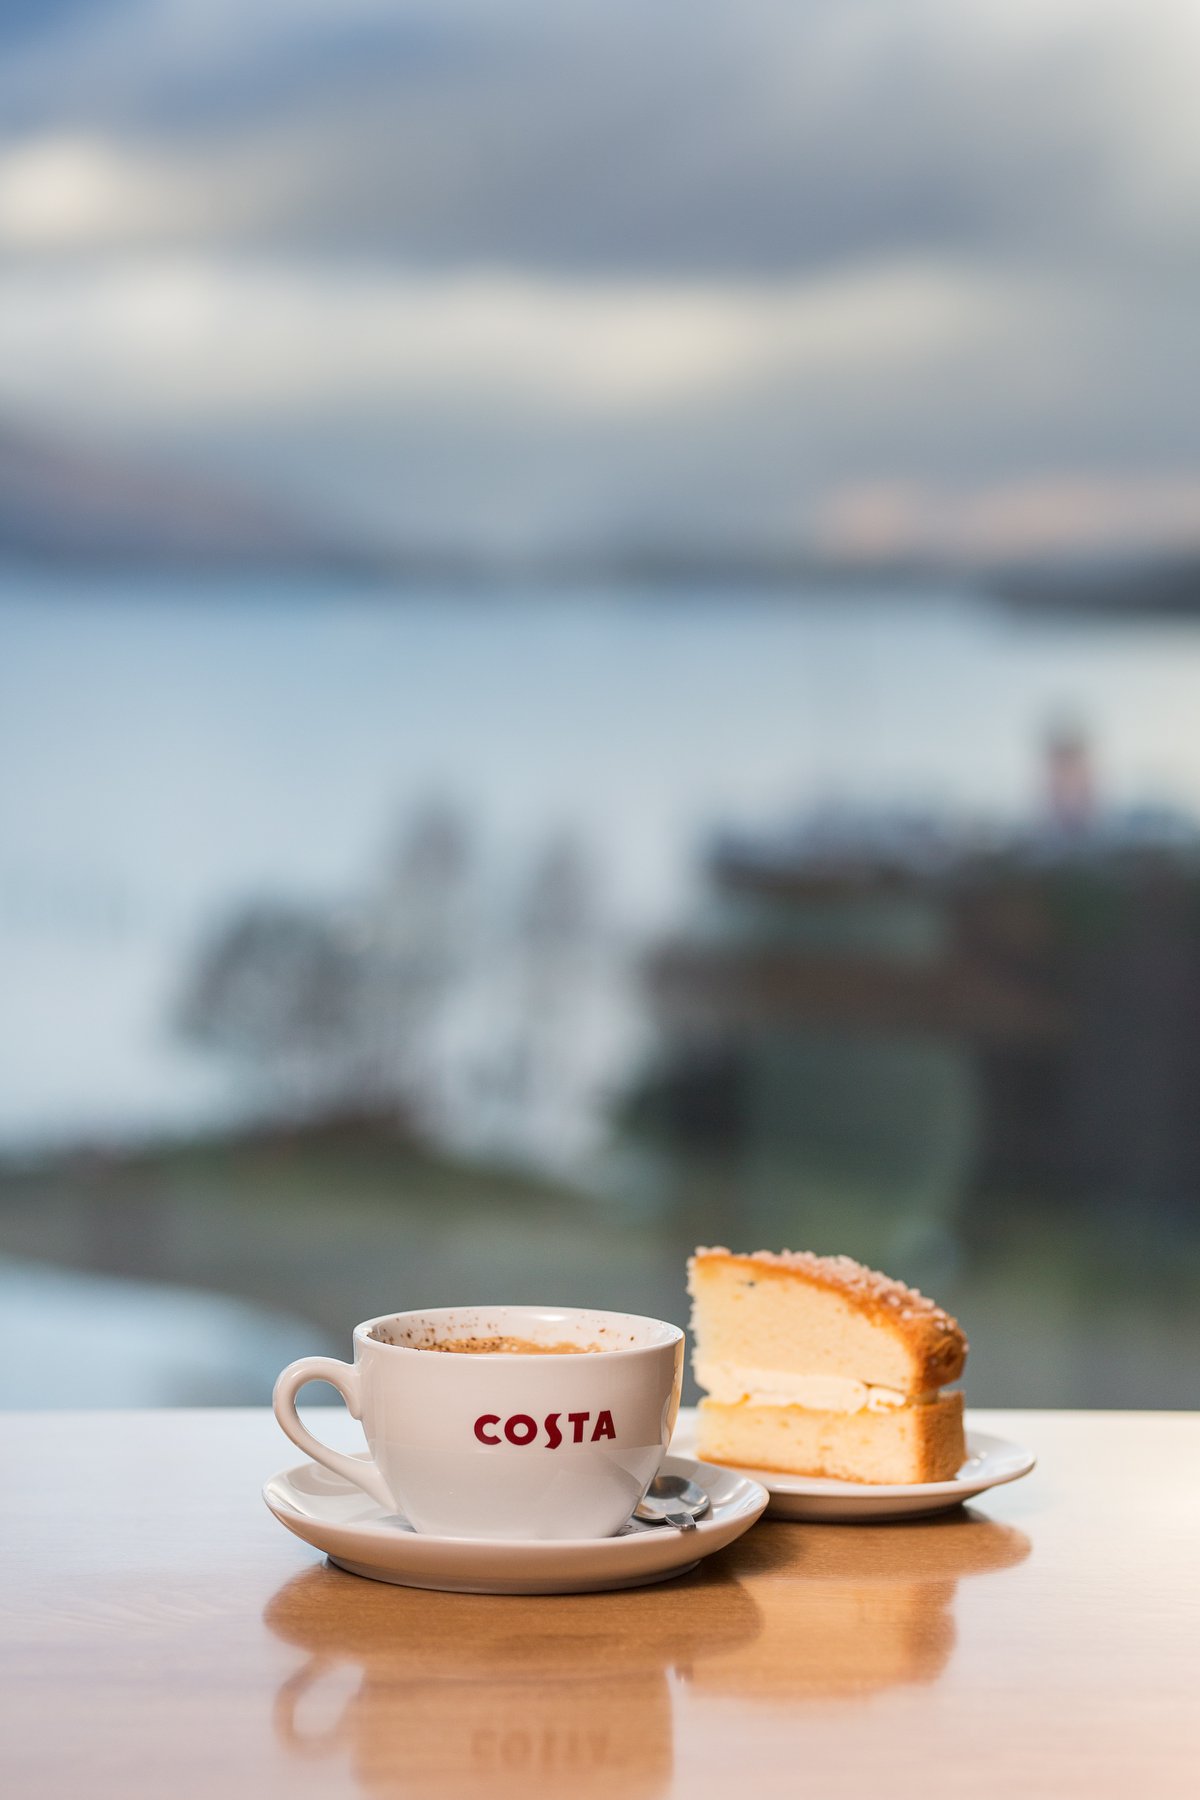 Costa coffee and cake at SEA LIFE Loch Lomond Loch view coffee shop